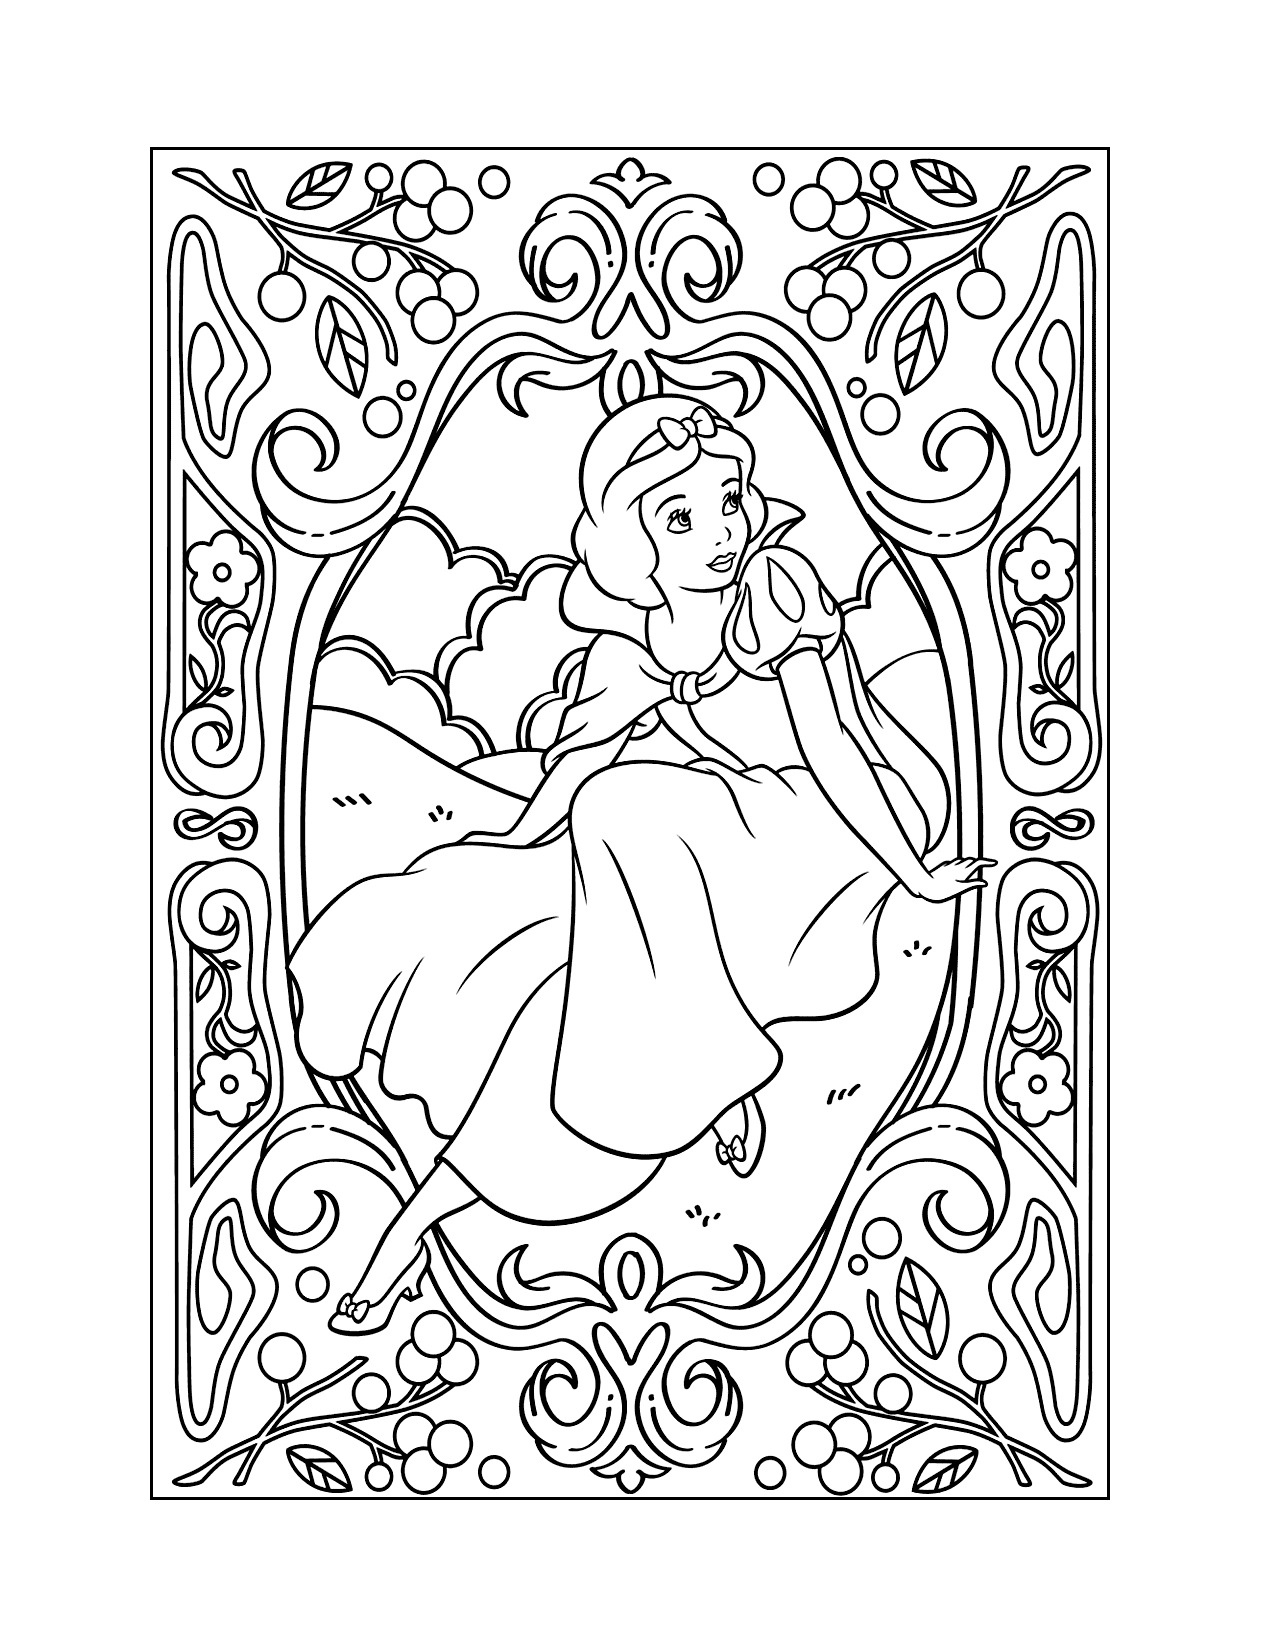 Detailed Snow White Coloring Page For Adults